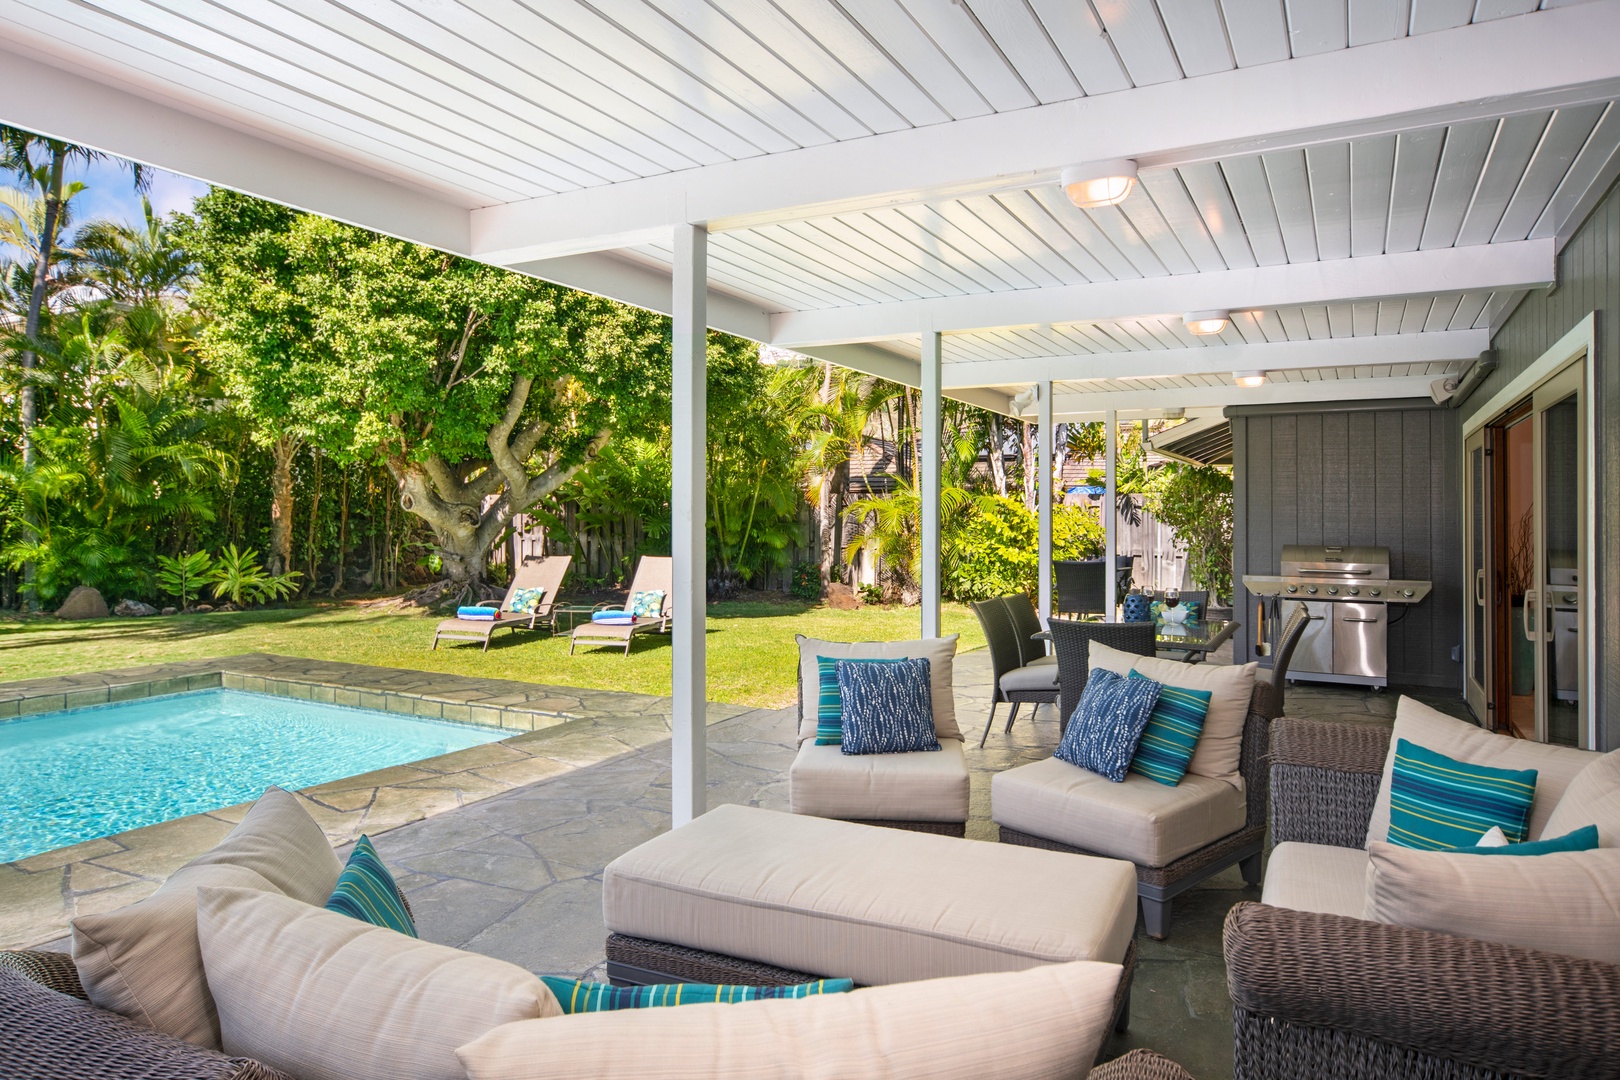 Honolulu Vacation Rentals, Hale Niuiki - Take a dip or lounge poolside with a drink in hand, surrounded by the lush landscape of this island paradise